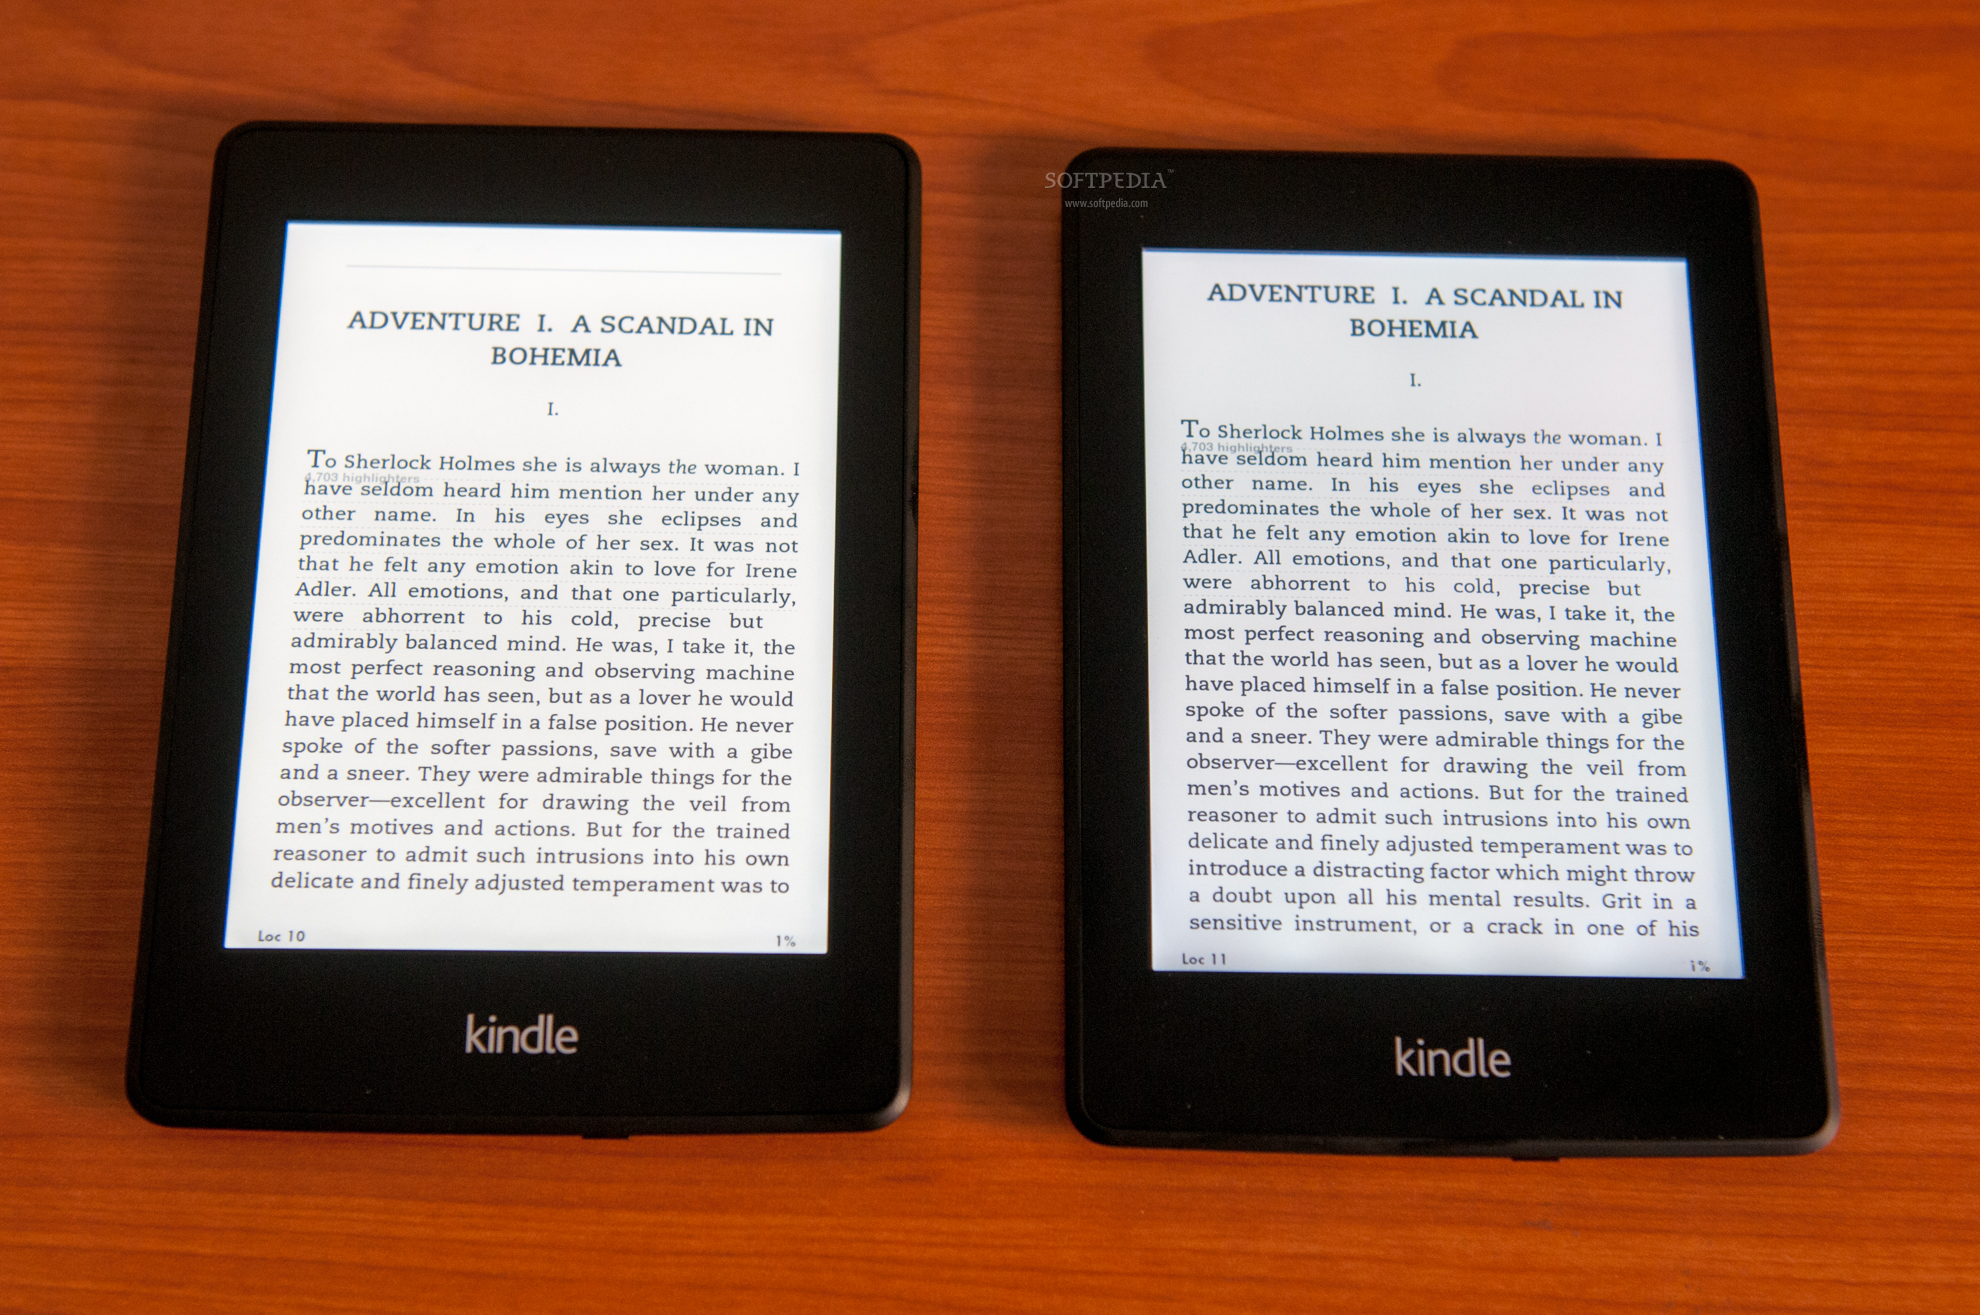 do kindle versions of books have audio